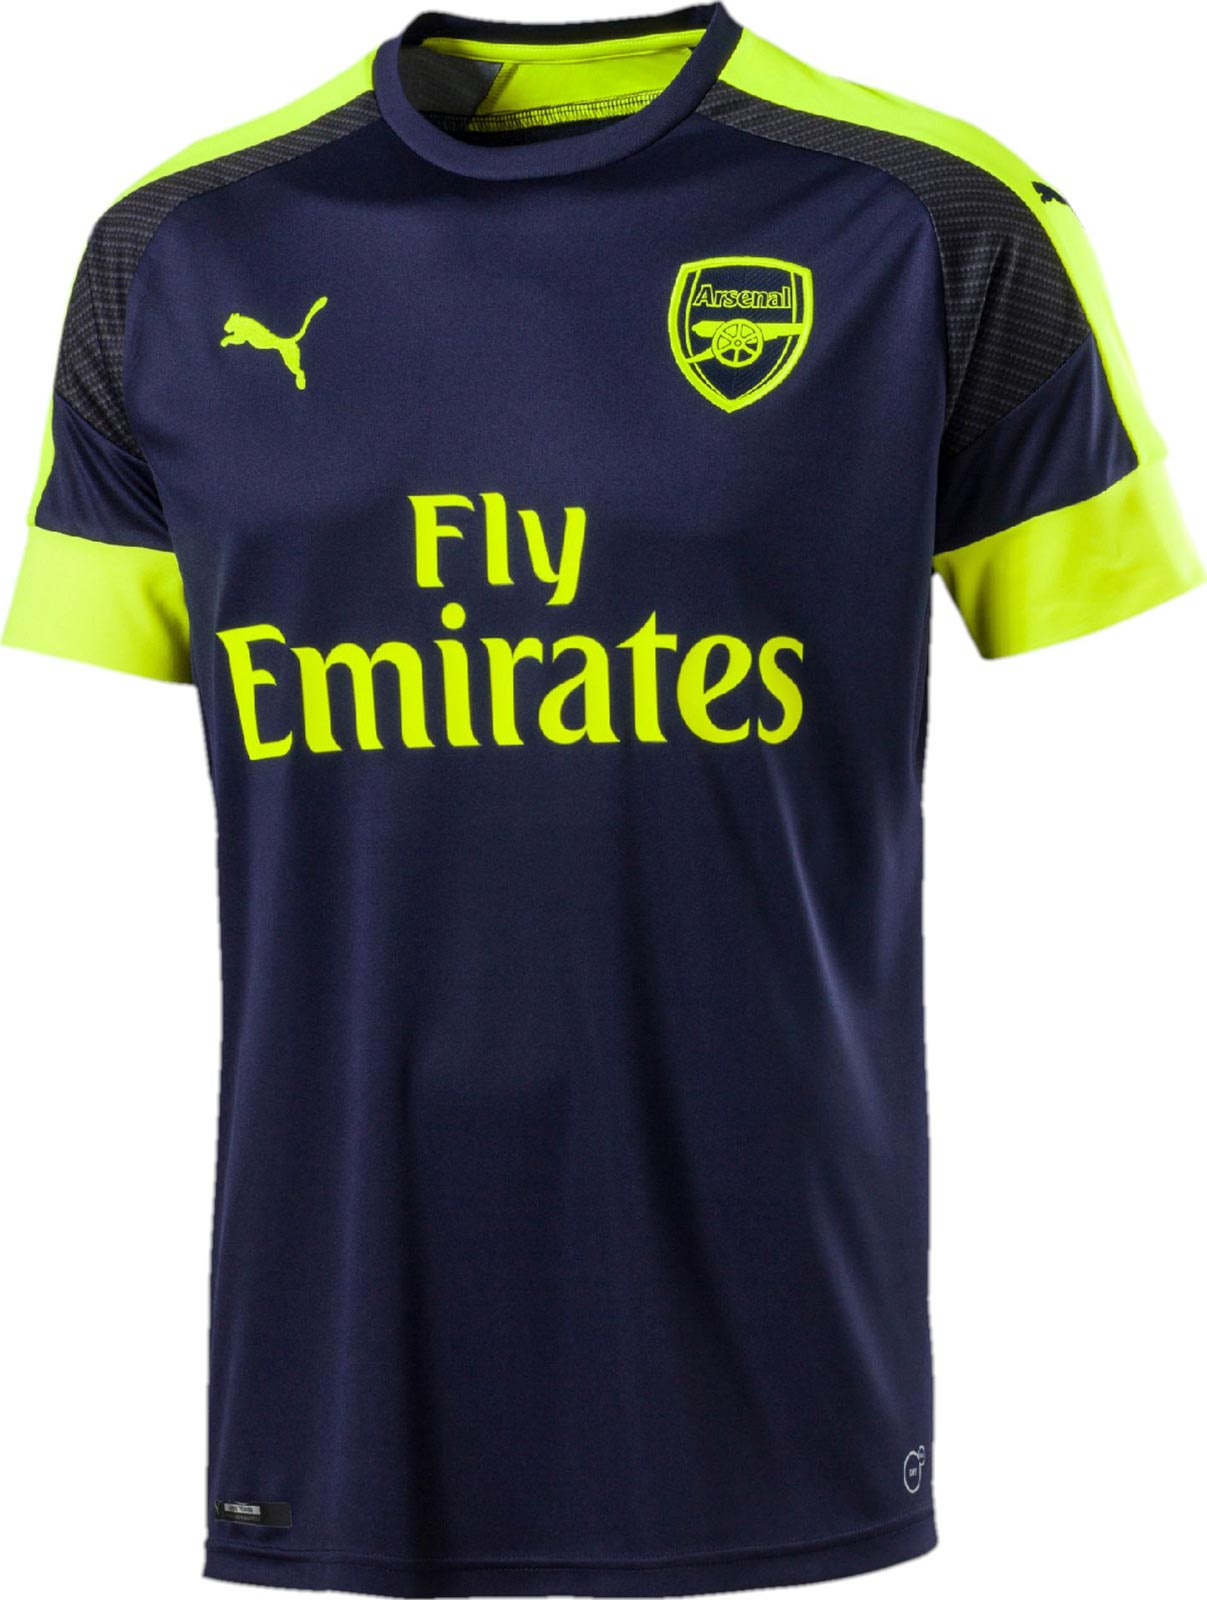 Introducing the new 2016/17 third kit